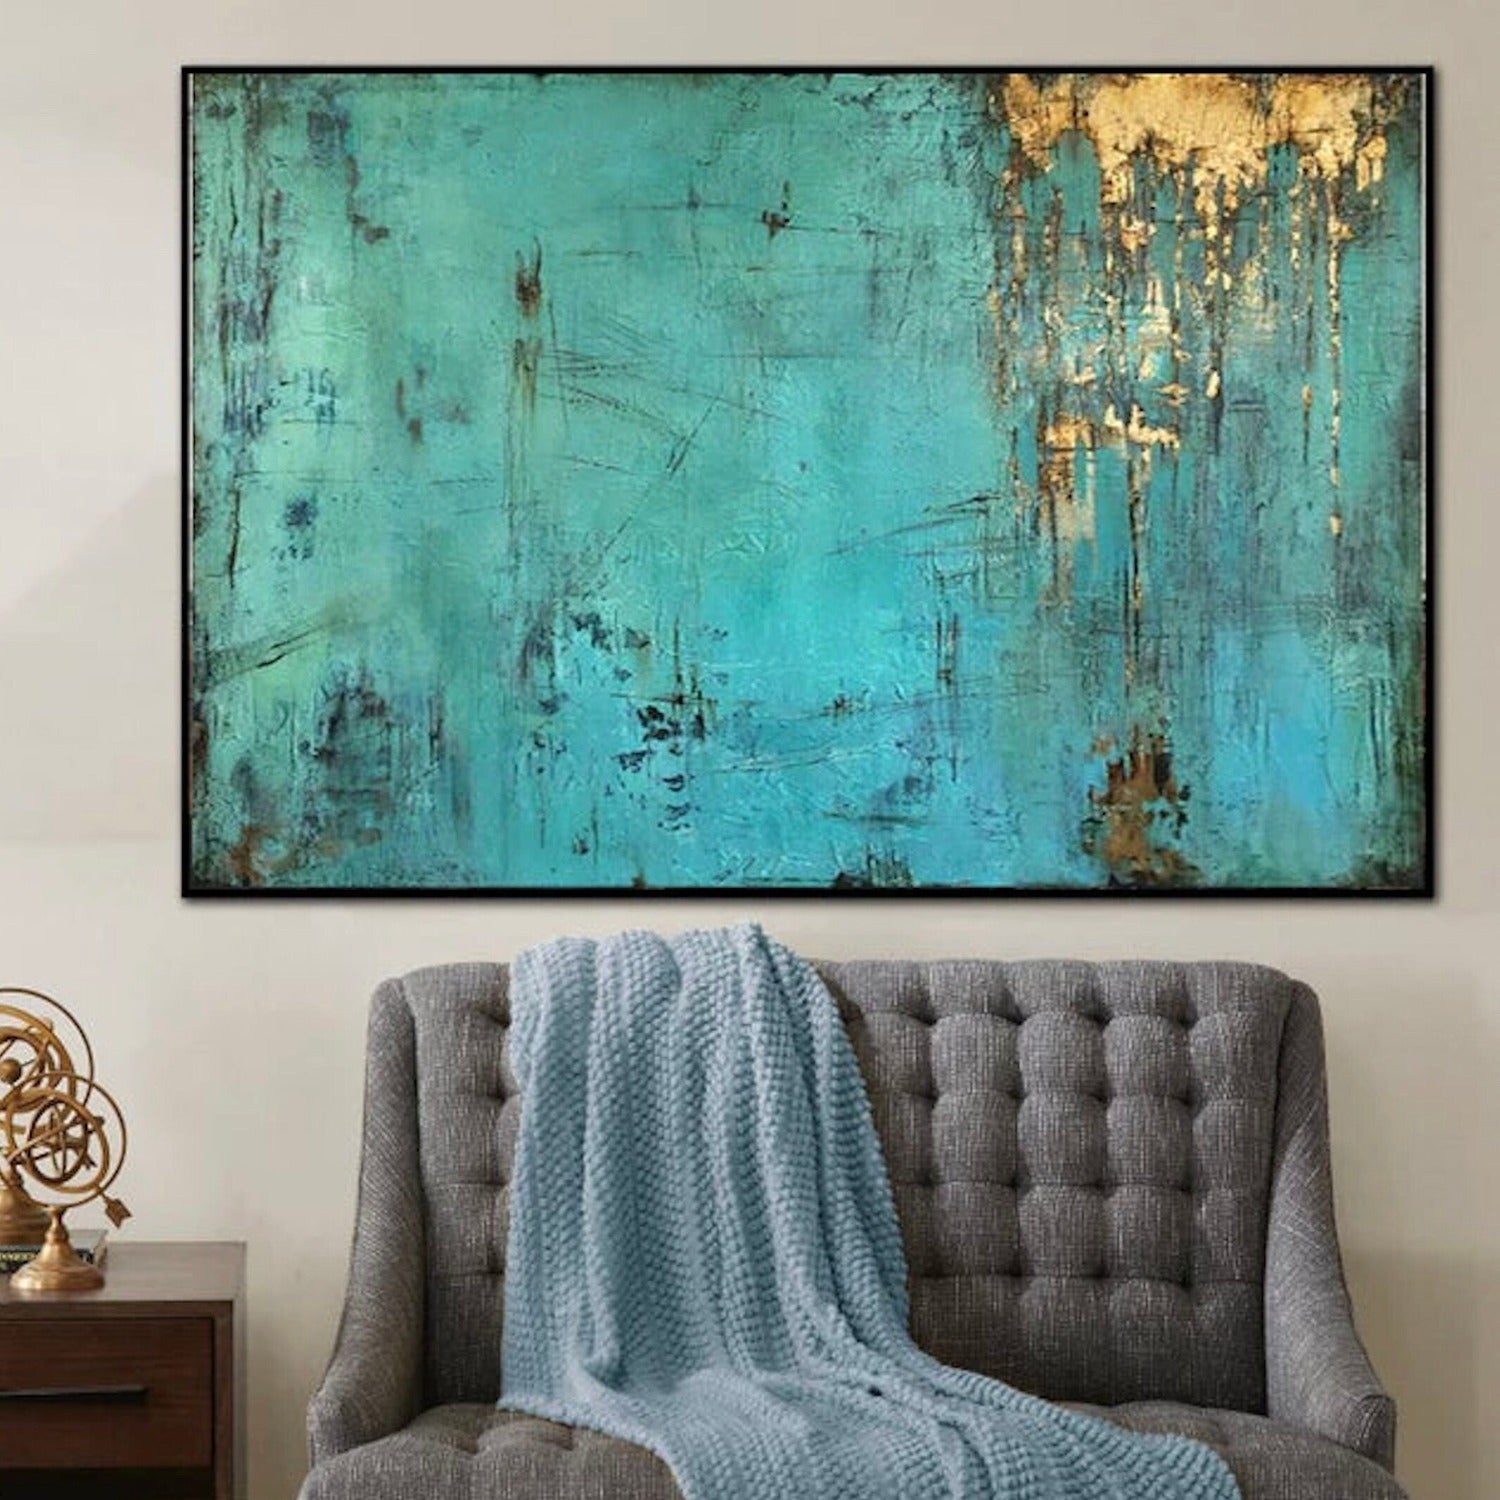 Large Emerald Green Gold Textured Acrylic Painting